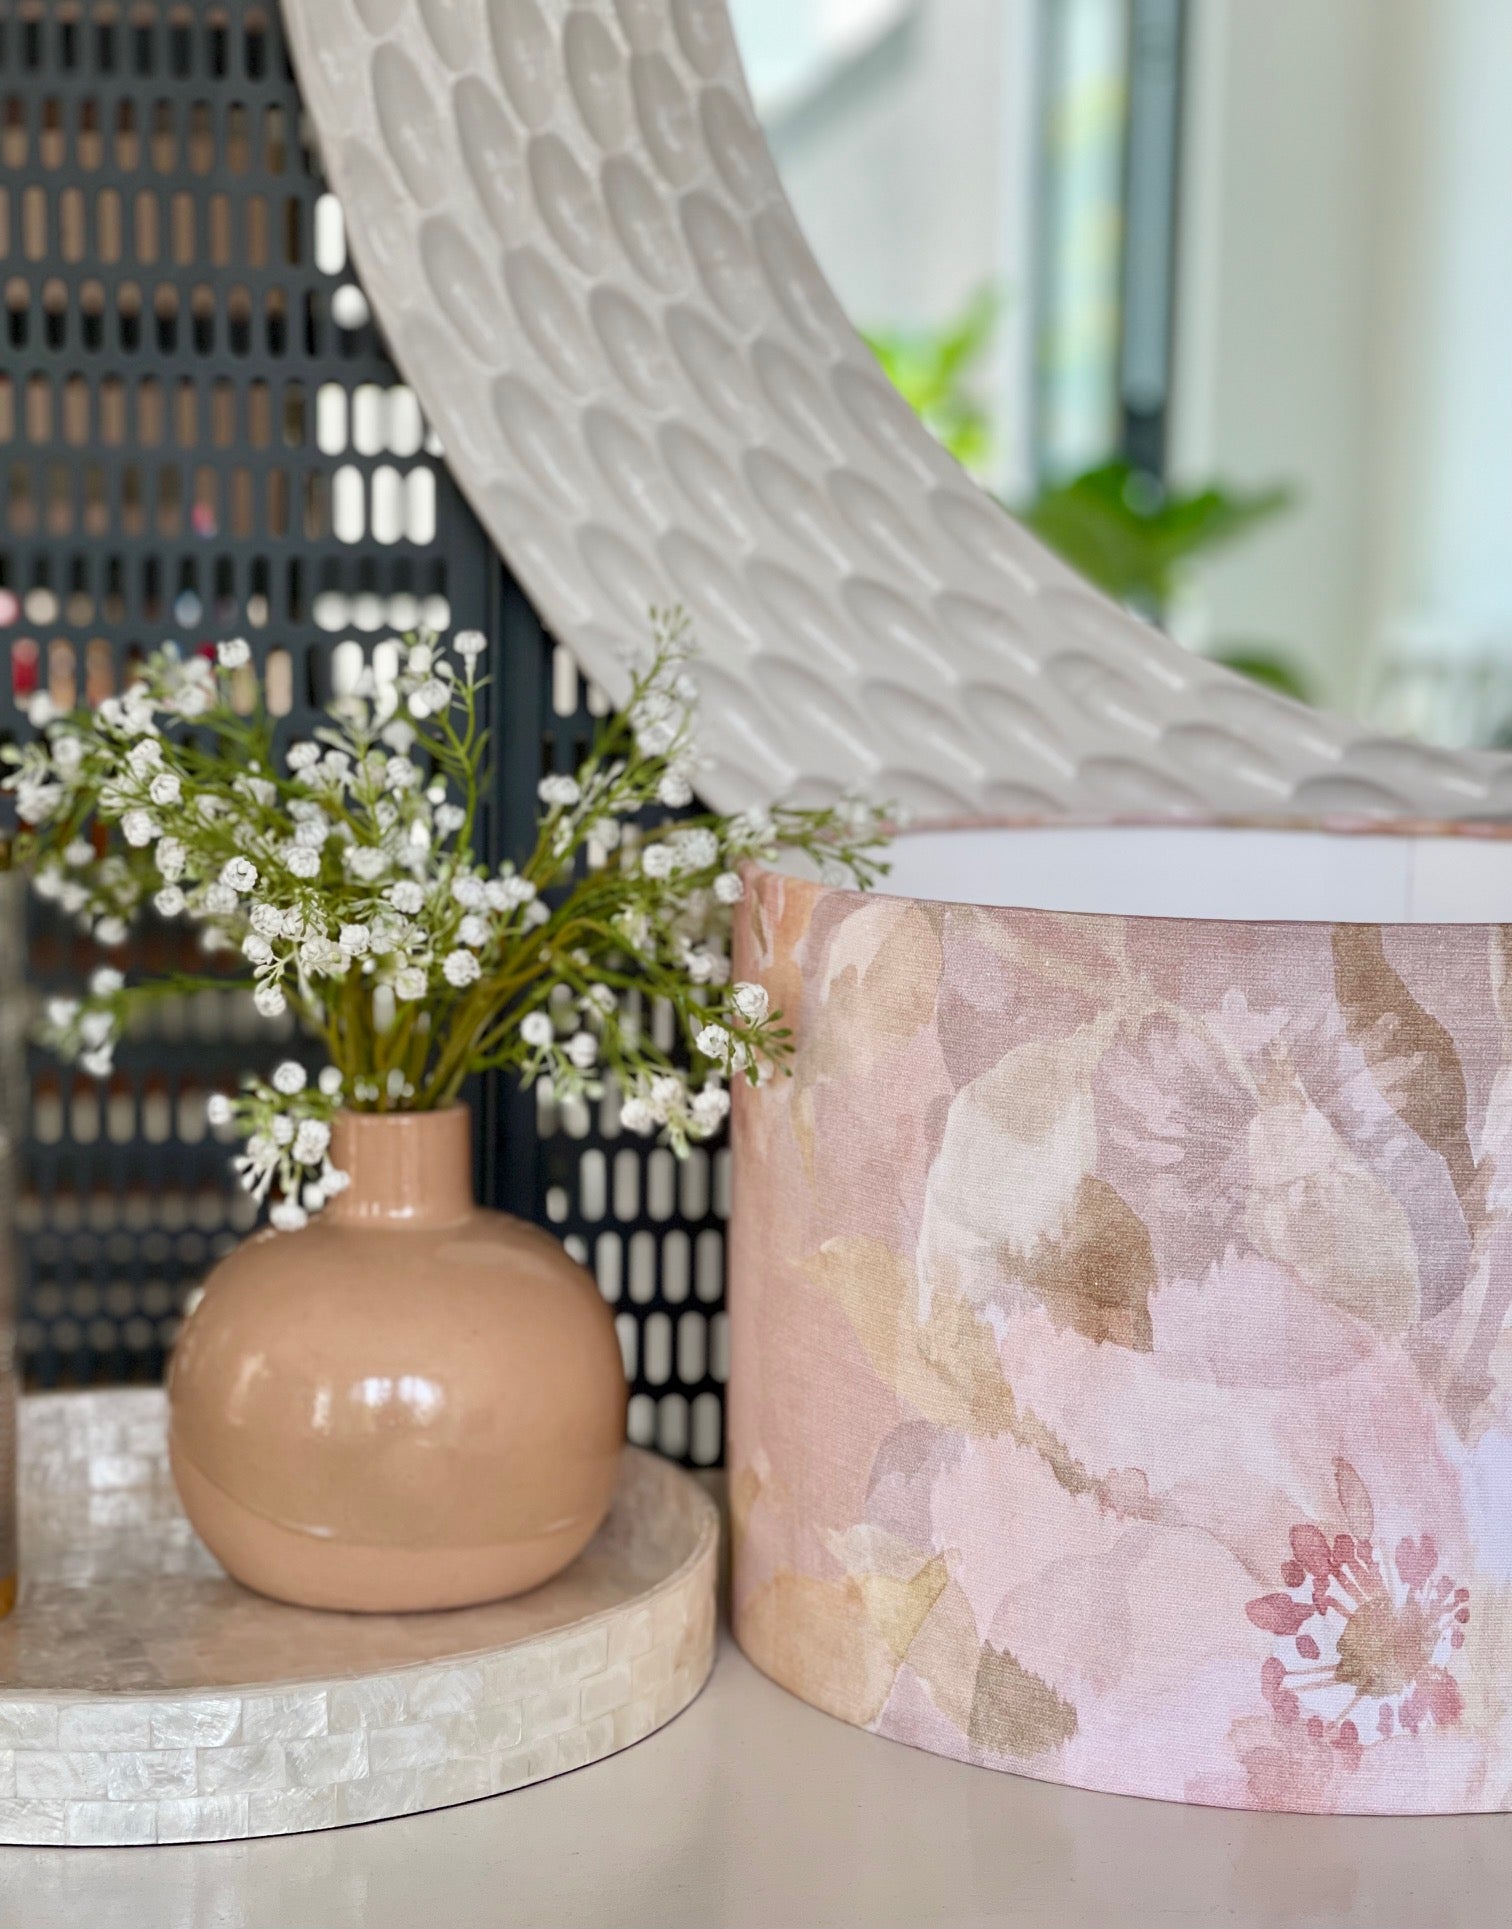 Handmade fabric lampshades Singapore in blush pink floral pattern